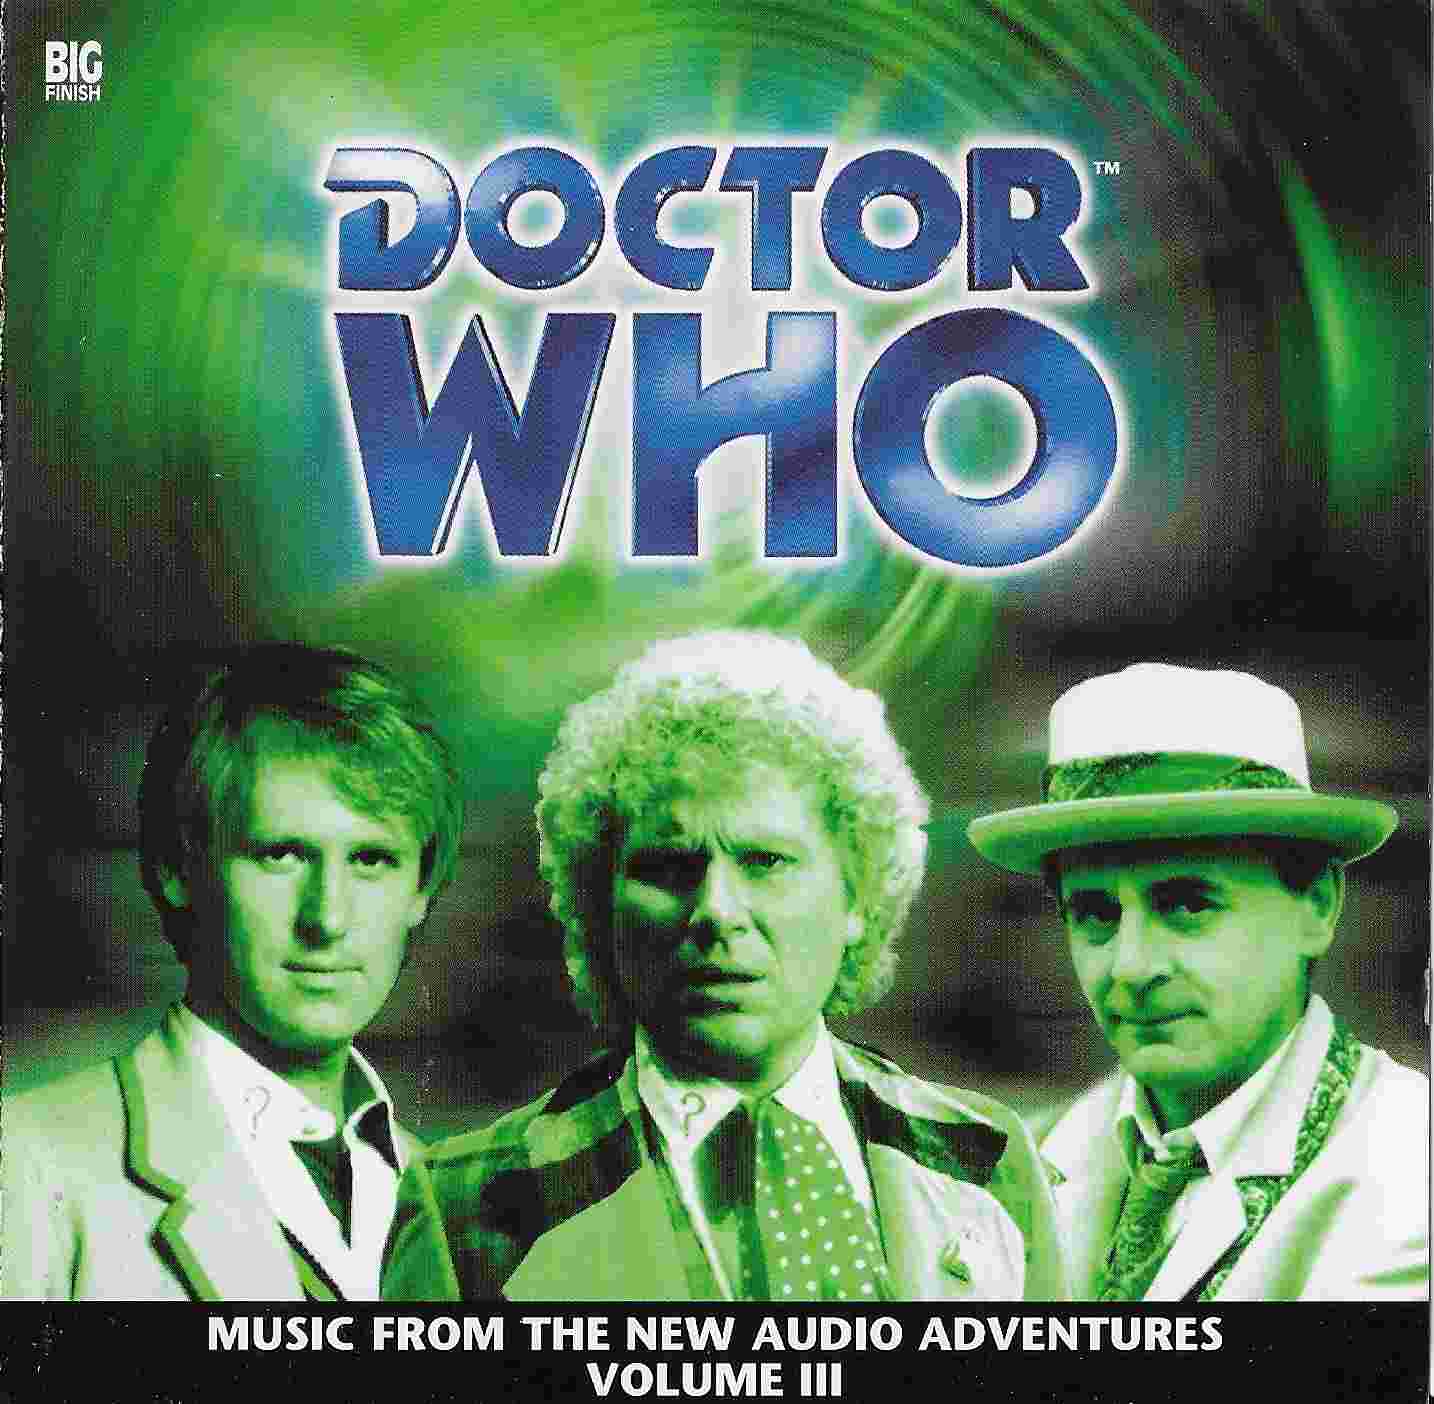 Picture of BFPCDMUSIC 3 Doctor Who - Music from the new adventures - Volume 3 by artist Various from the BBC records and Tapes library